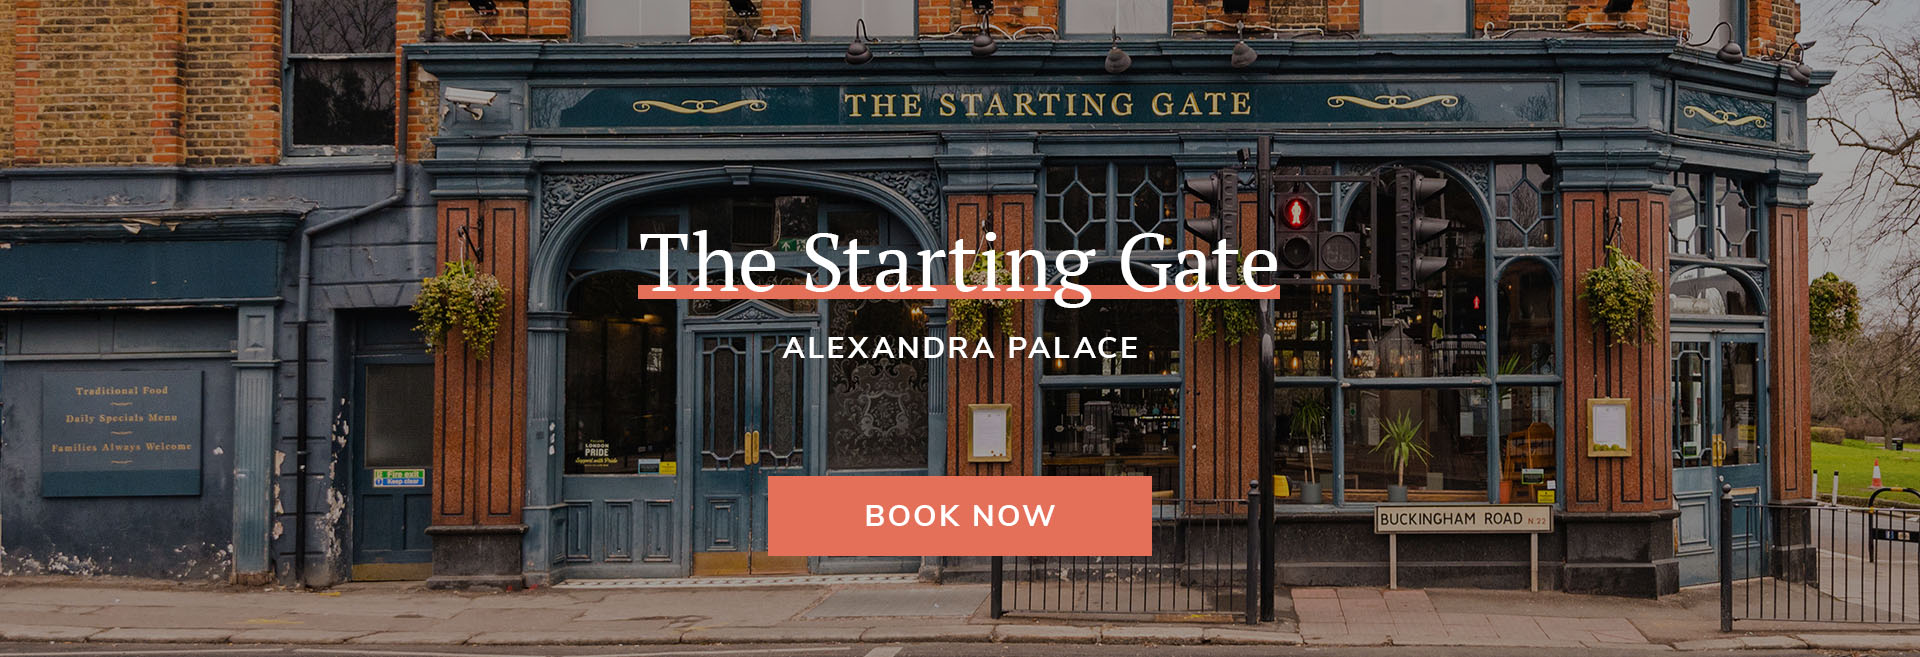 The Starting Gate Pub & Restaurant in Wood Green, Greater London